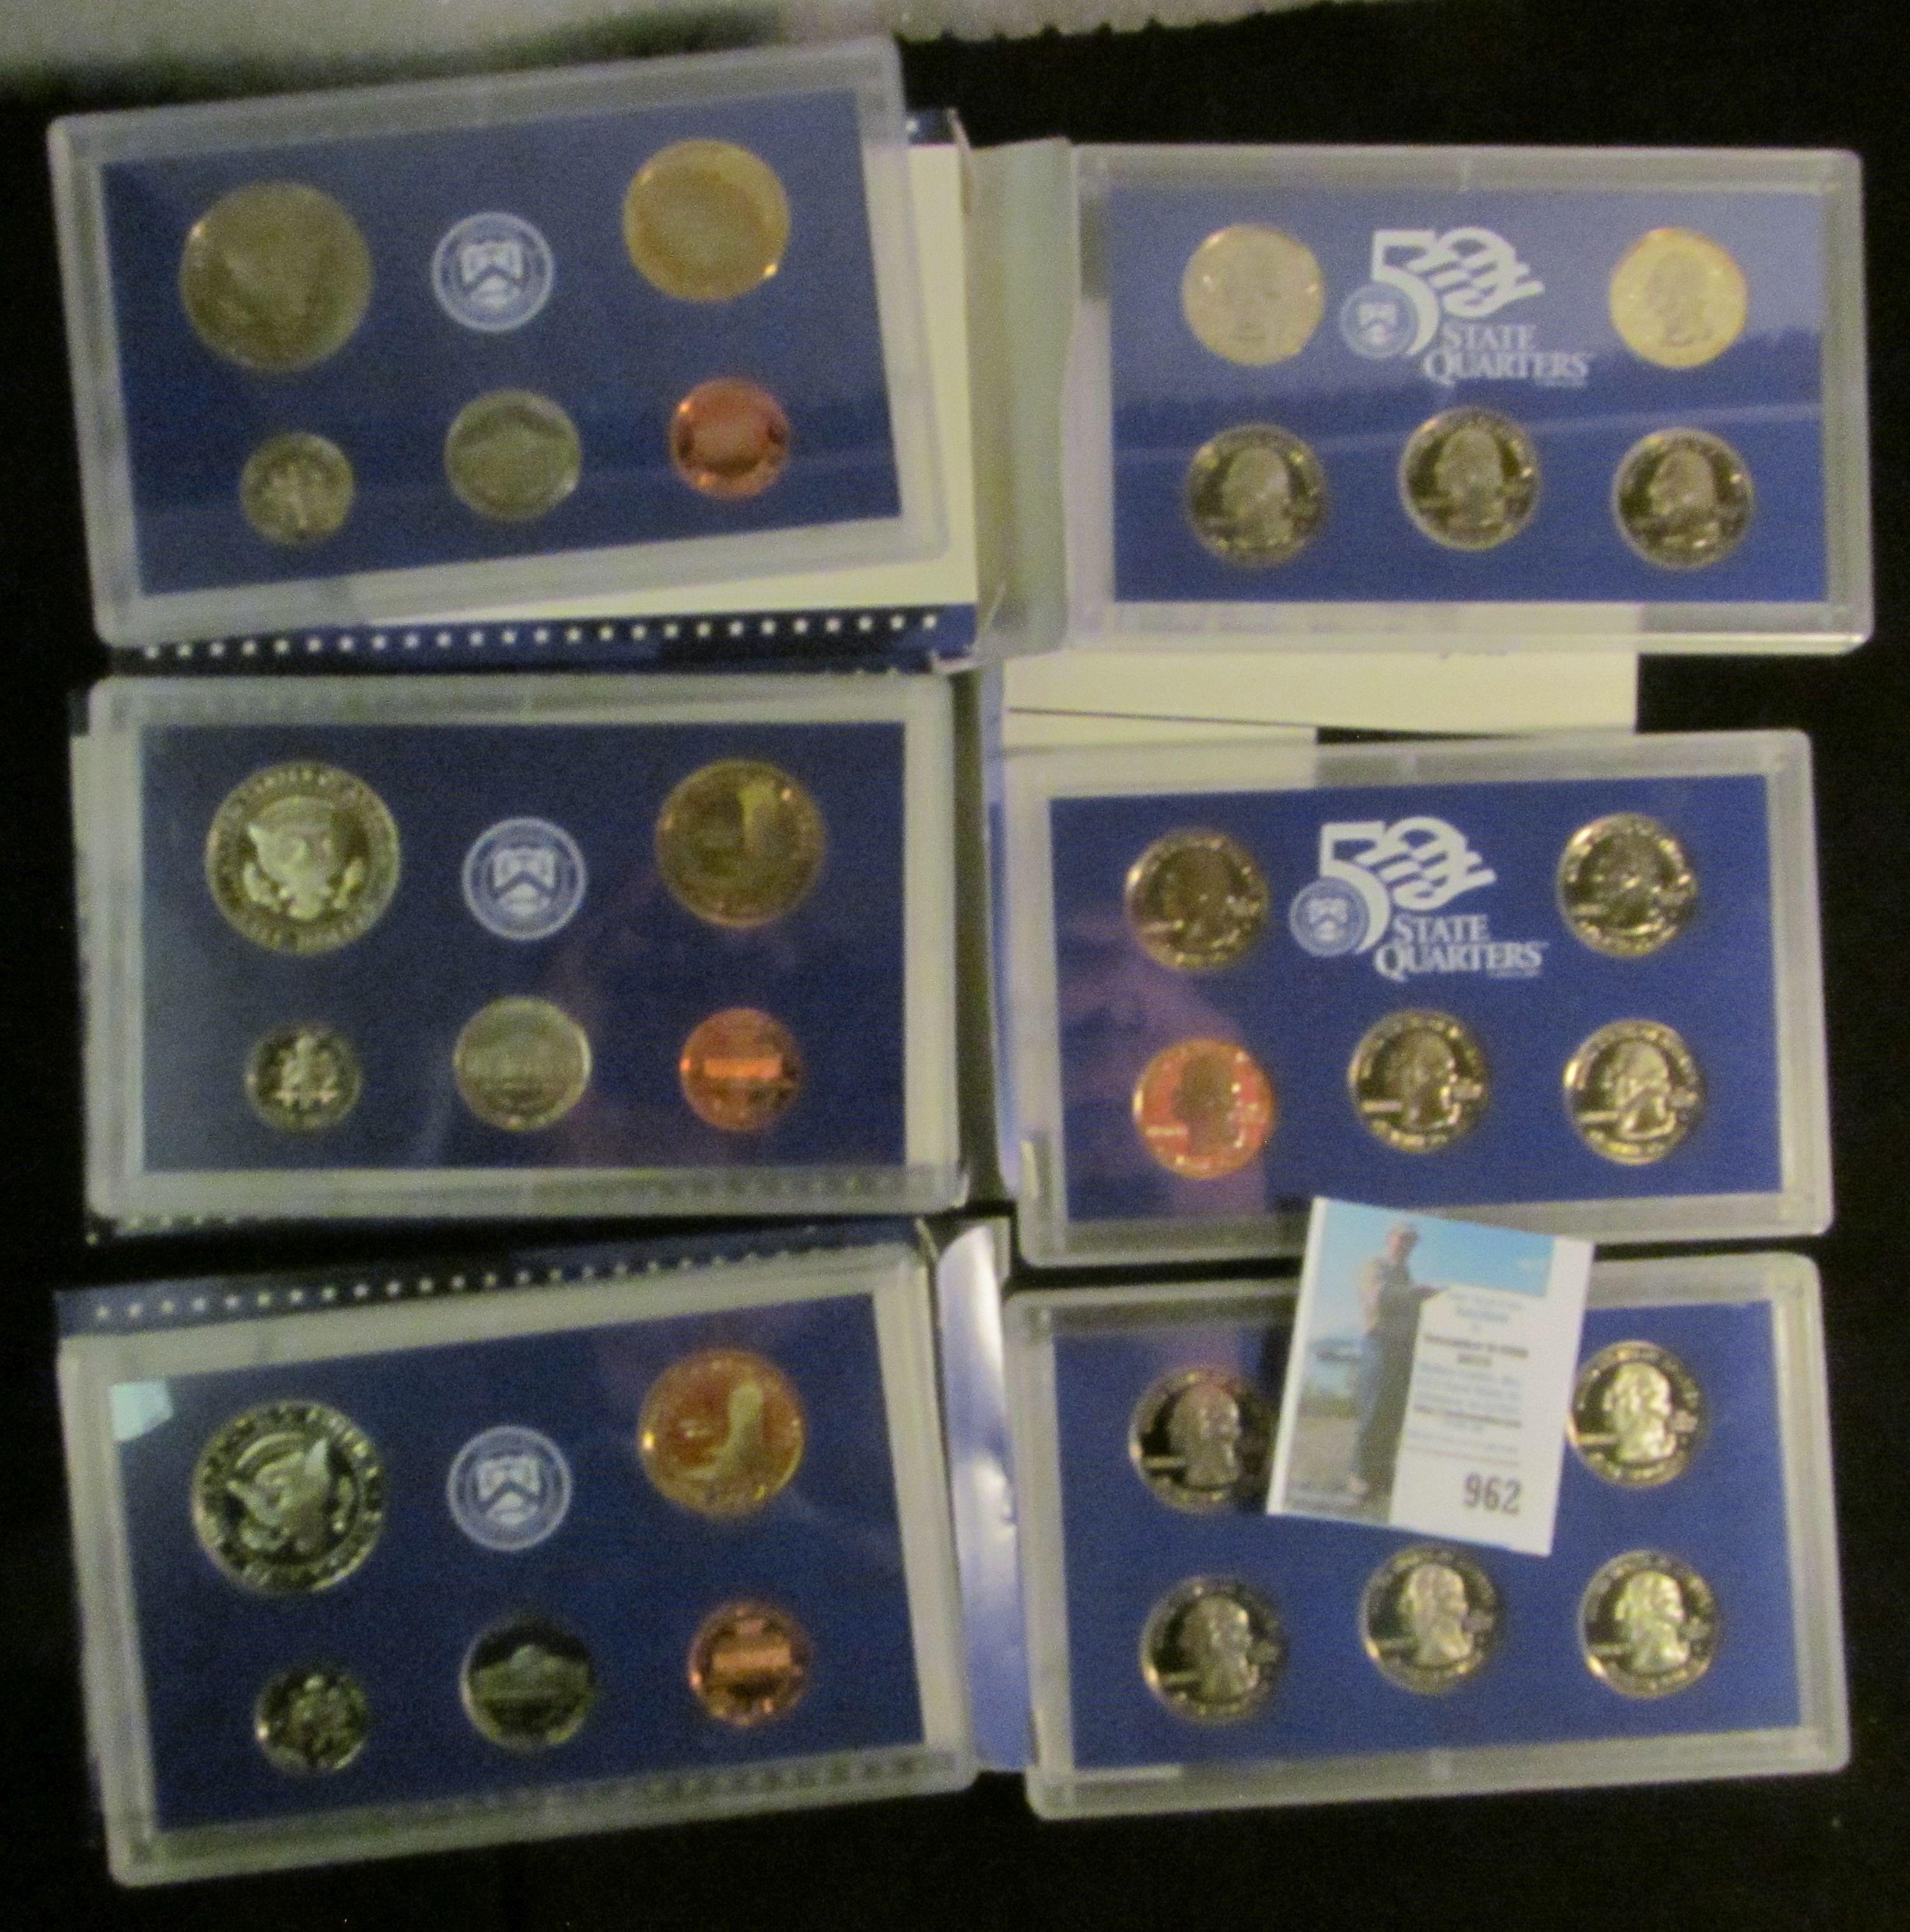 2000 S, 2001 S, & 2002 S U.S. Proof Sets, all original as issued.